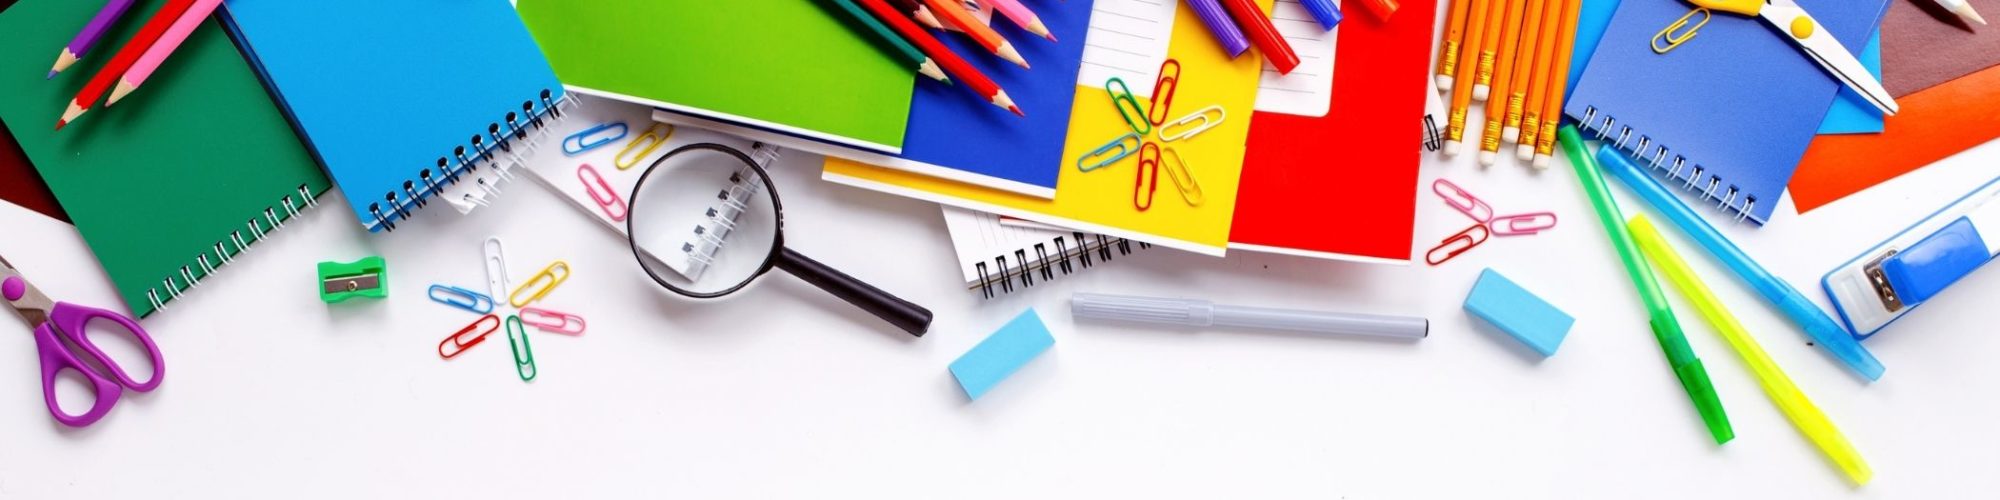 School Supplies scattered on a white desk background